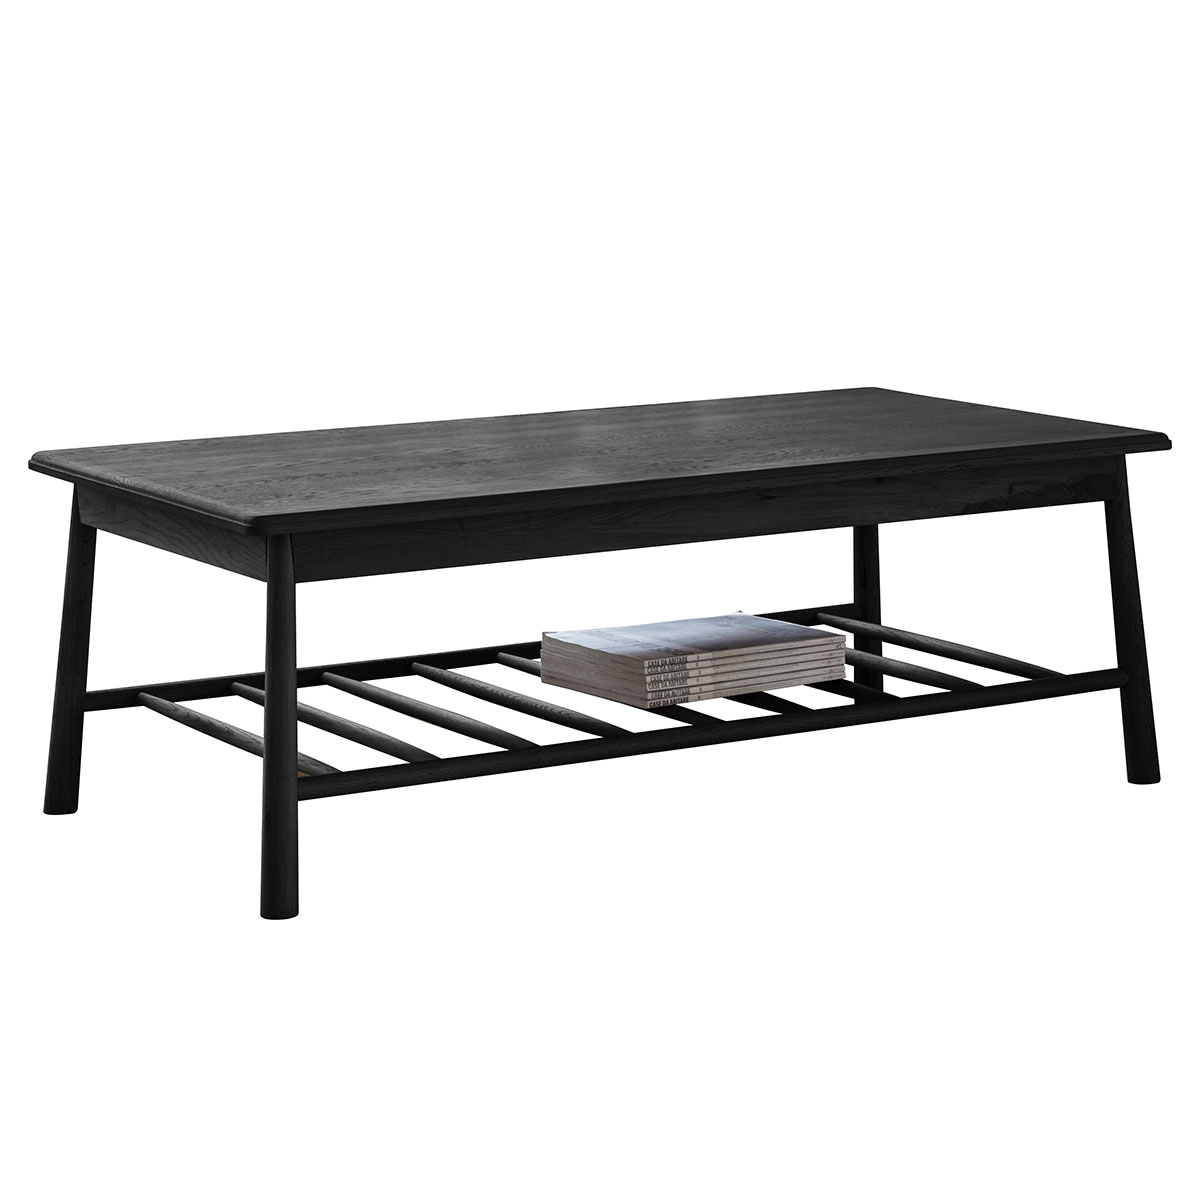 Wycombe Rect Coffee Table Black 1200x650x425mm